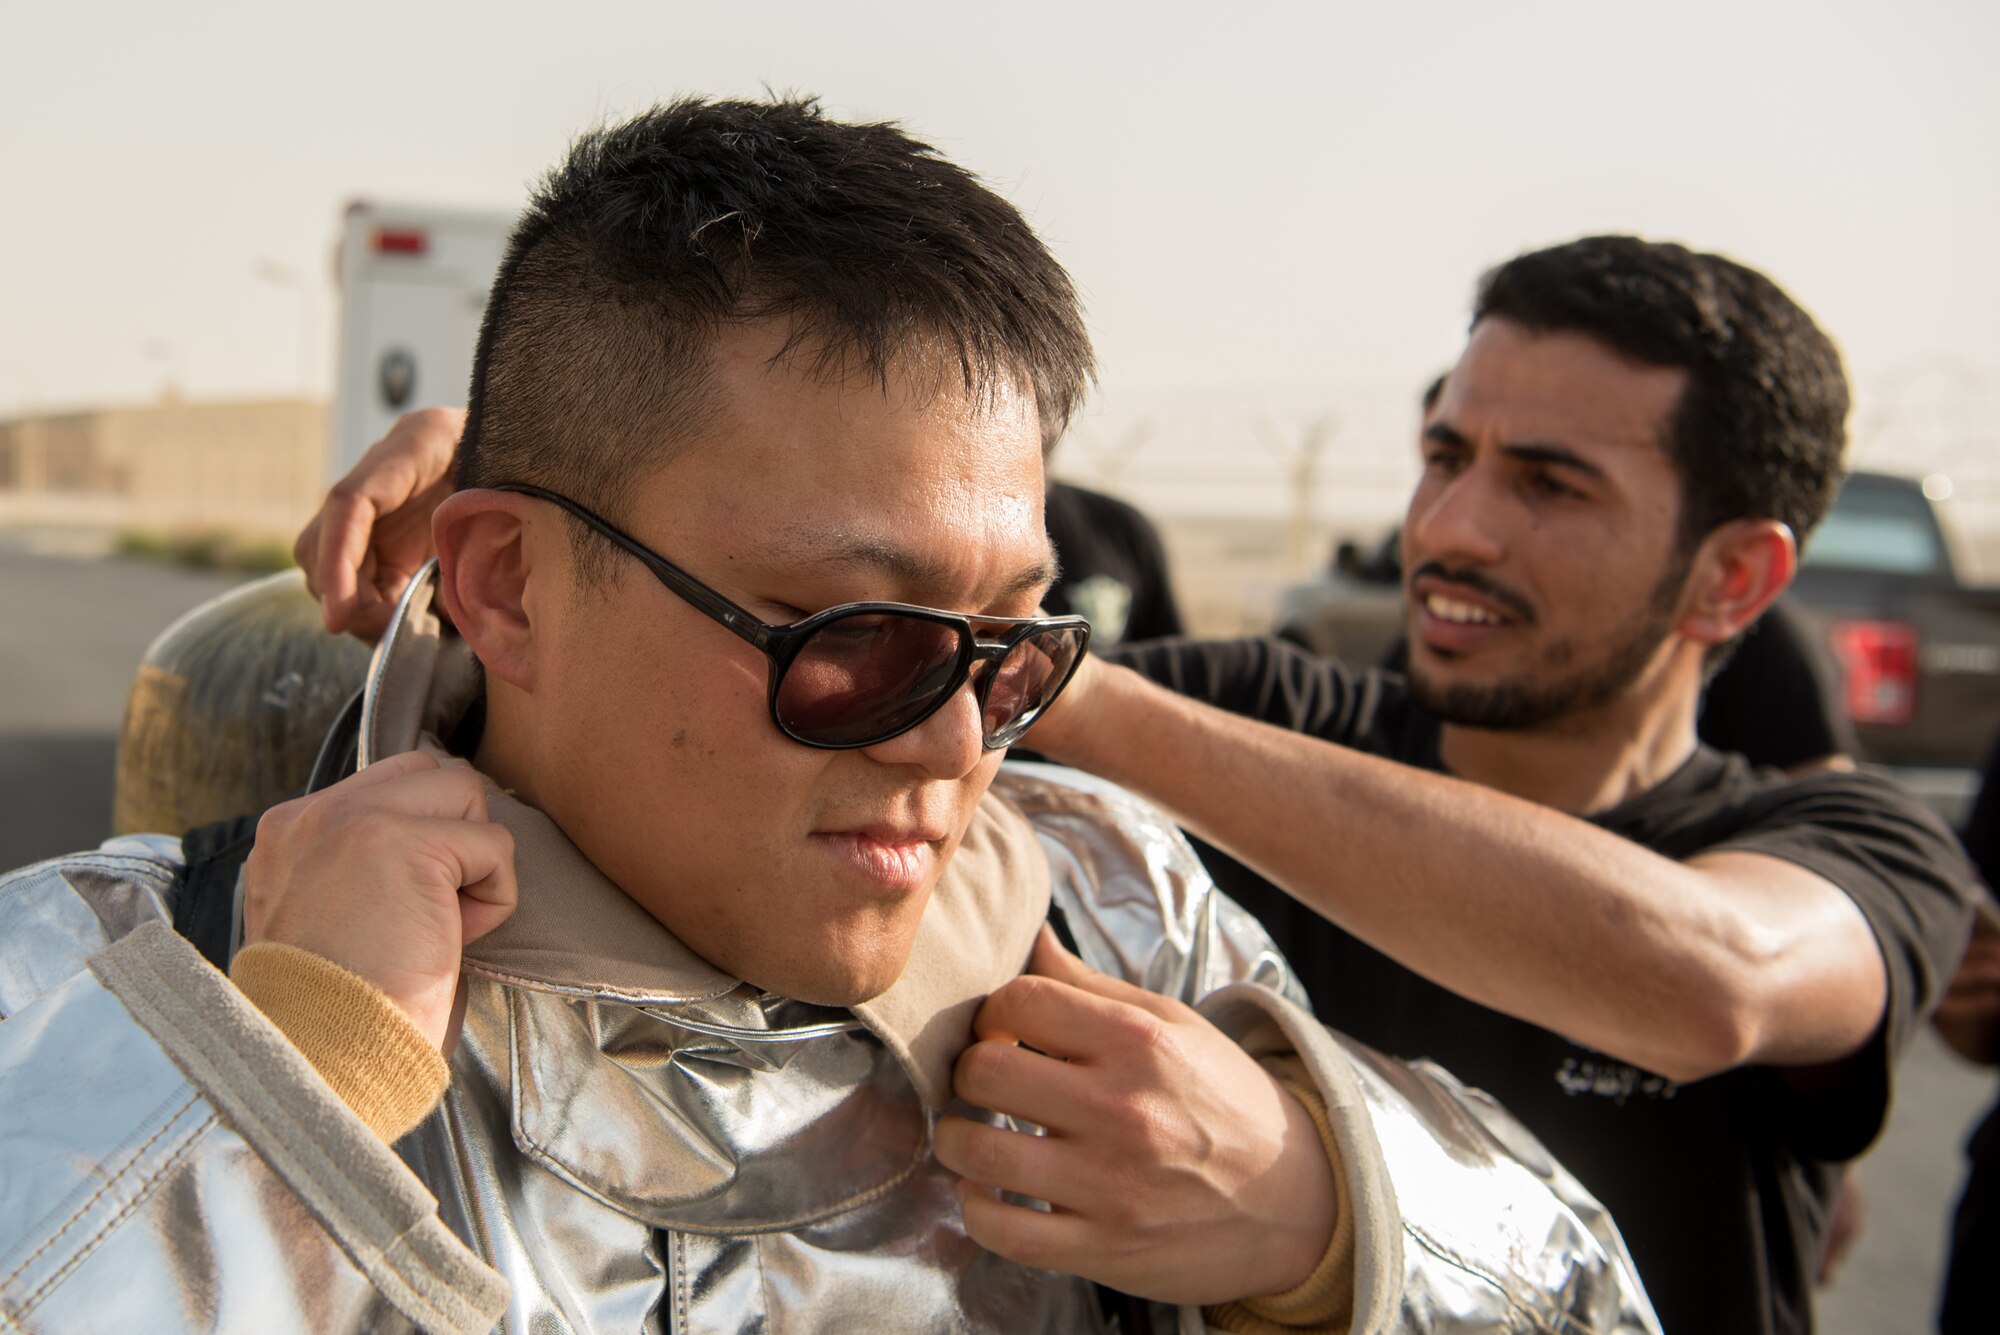 2nd Lt. Taegyung Lee (left), project manager from the 379th Expeditionary Civil Engineer Squadron, is assisted by a firefighter from the Qatar Emiri Air Force as Lee prepares to participate in a firefighter challenge exercise at Al Udeid Air Base, Qatar, March 8, 2018. The a exercise, a strenuous course designed to test physical fitness and fire response capabilities, was organized by firefighters from the 379th ECES and QEAF. (U.S. Air Force photo by Staff Sgt. Joshua Horton)